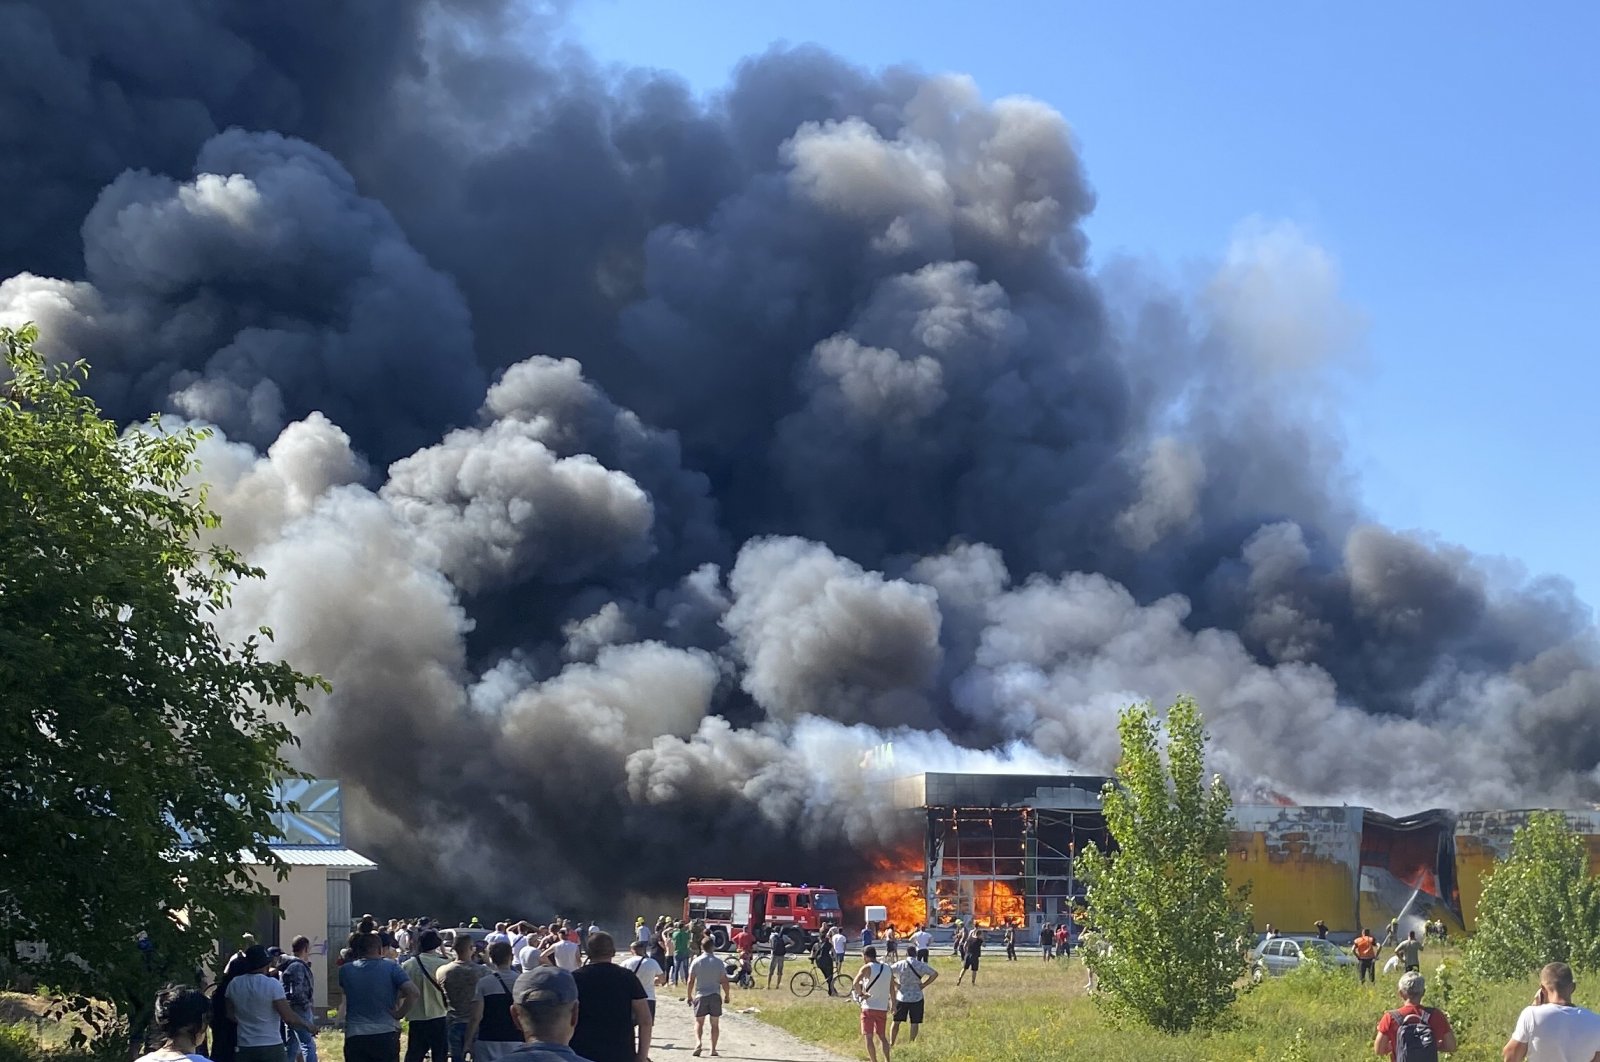 People watch as smoke bellows after a Russian missile strike hit a crowded shopping mall, in Kremenchuk, Ukraine, June 27, 2022. (AP Photo)